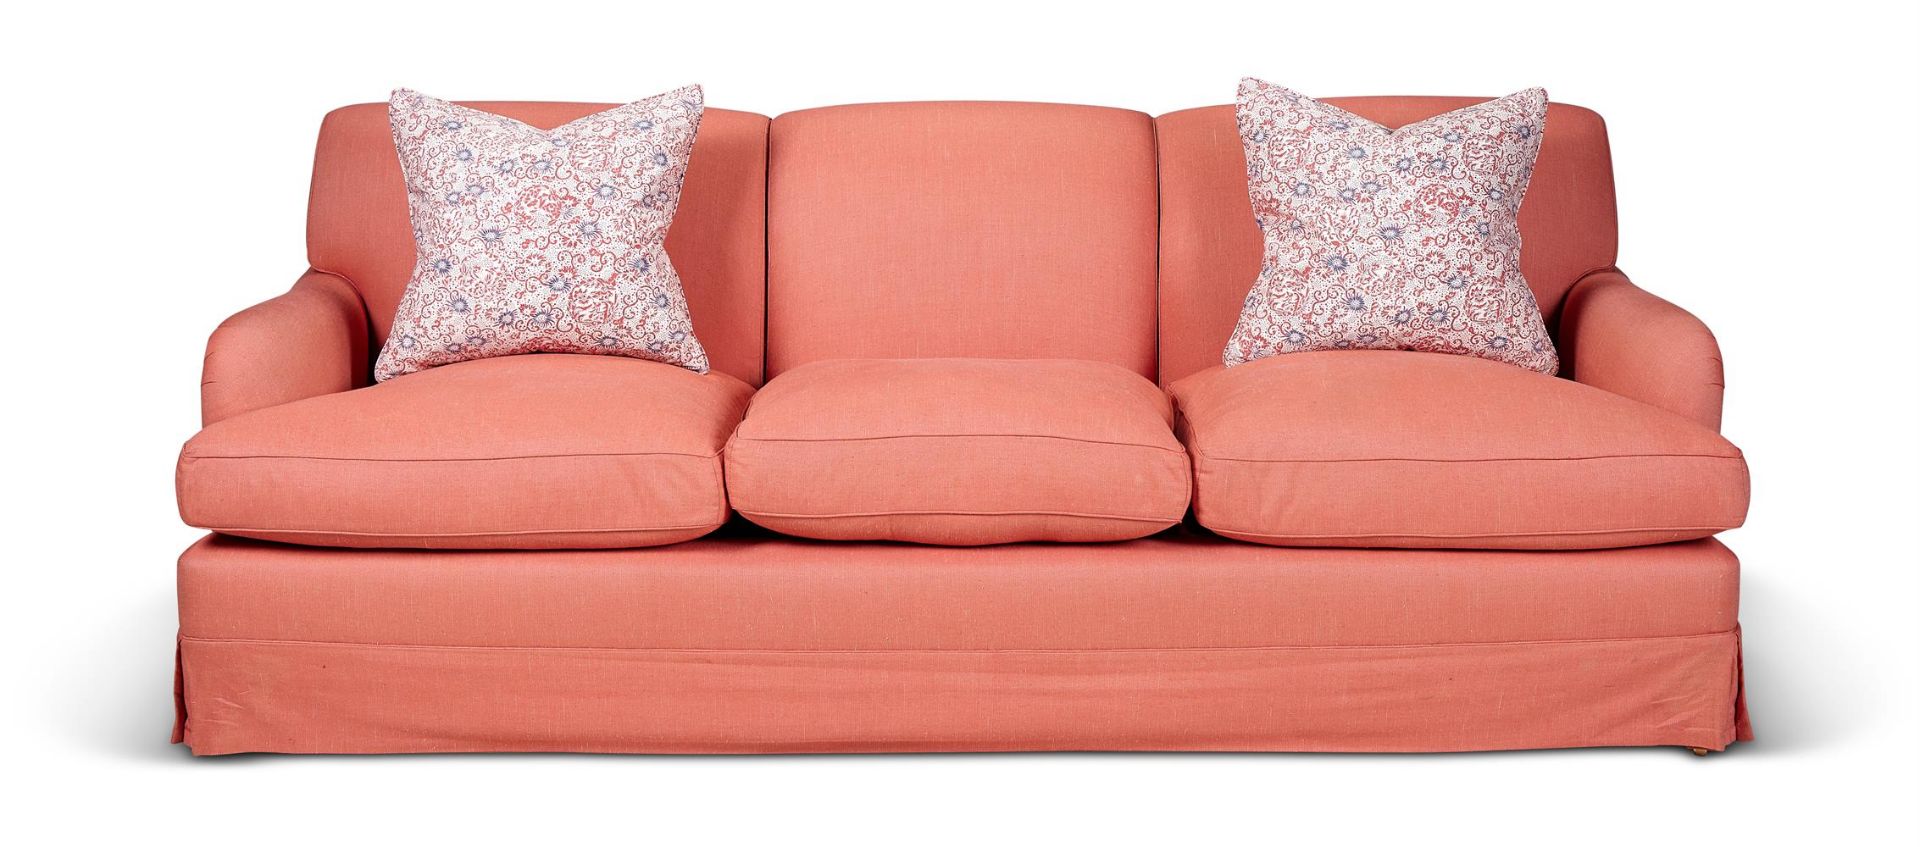 A PINK UPHOLSTERED THREE SEAT SOFA, MODERN